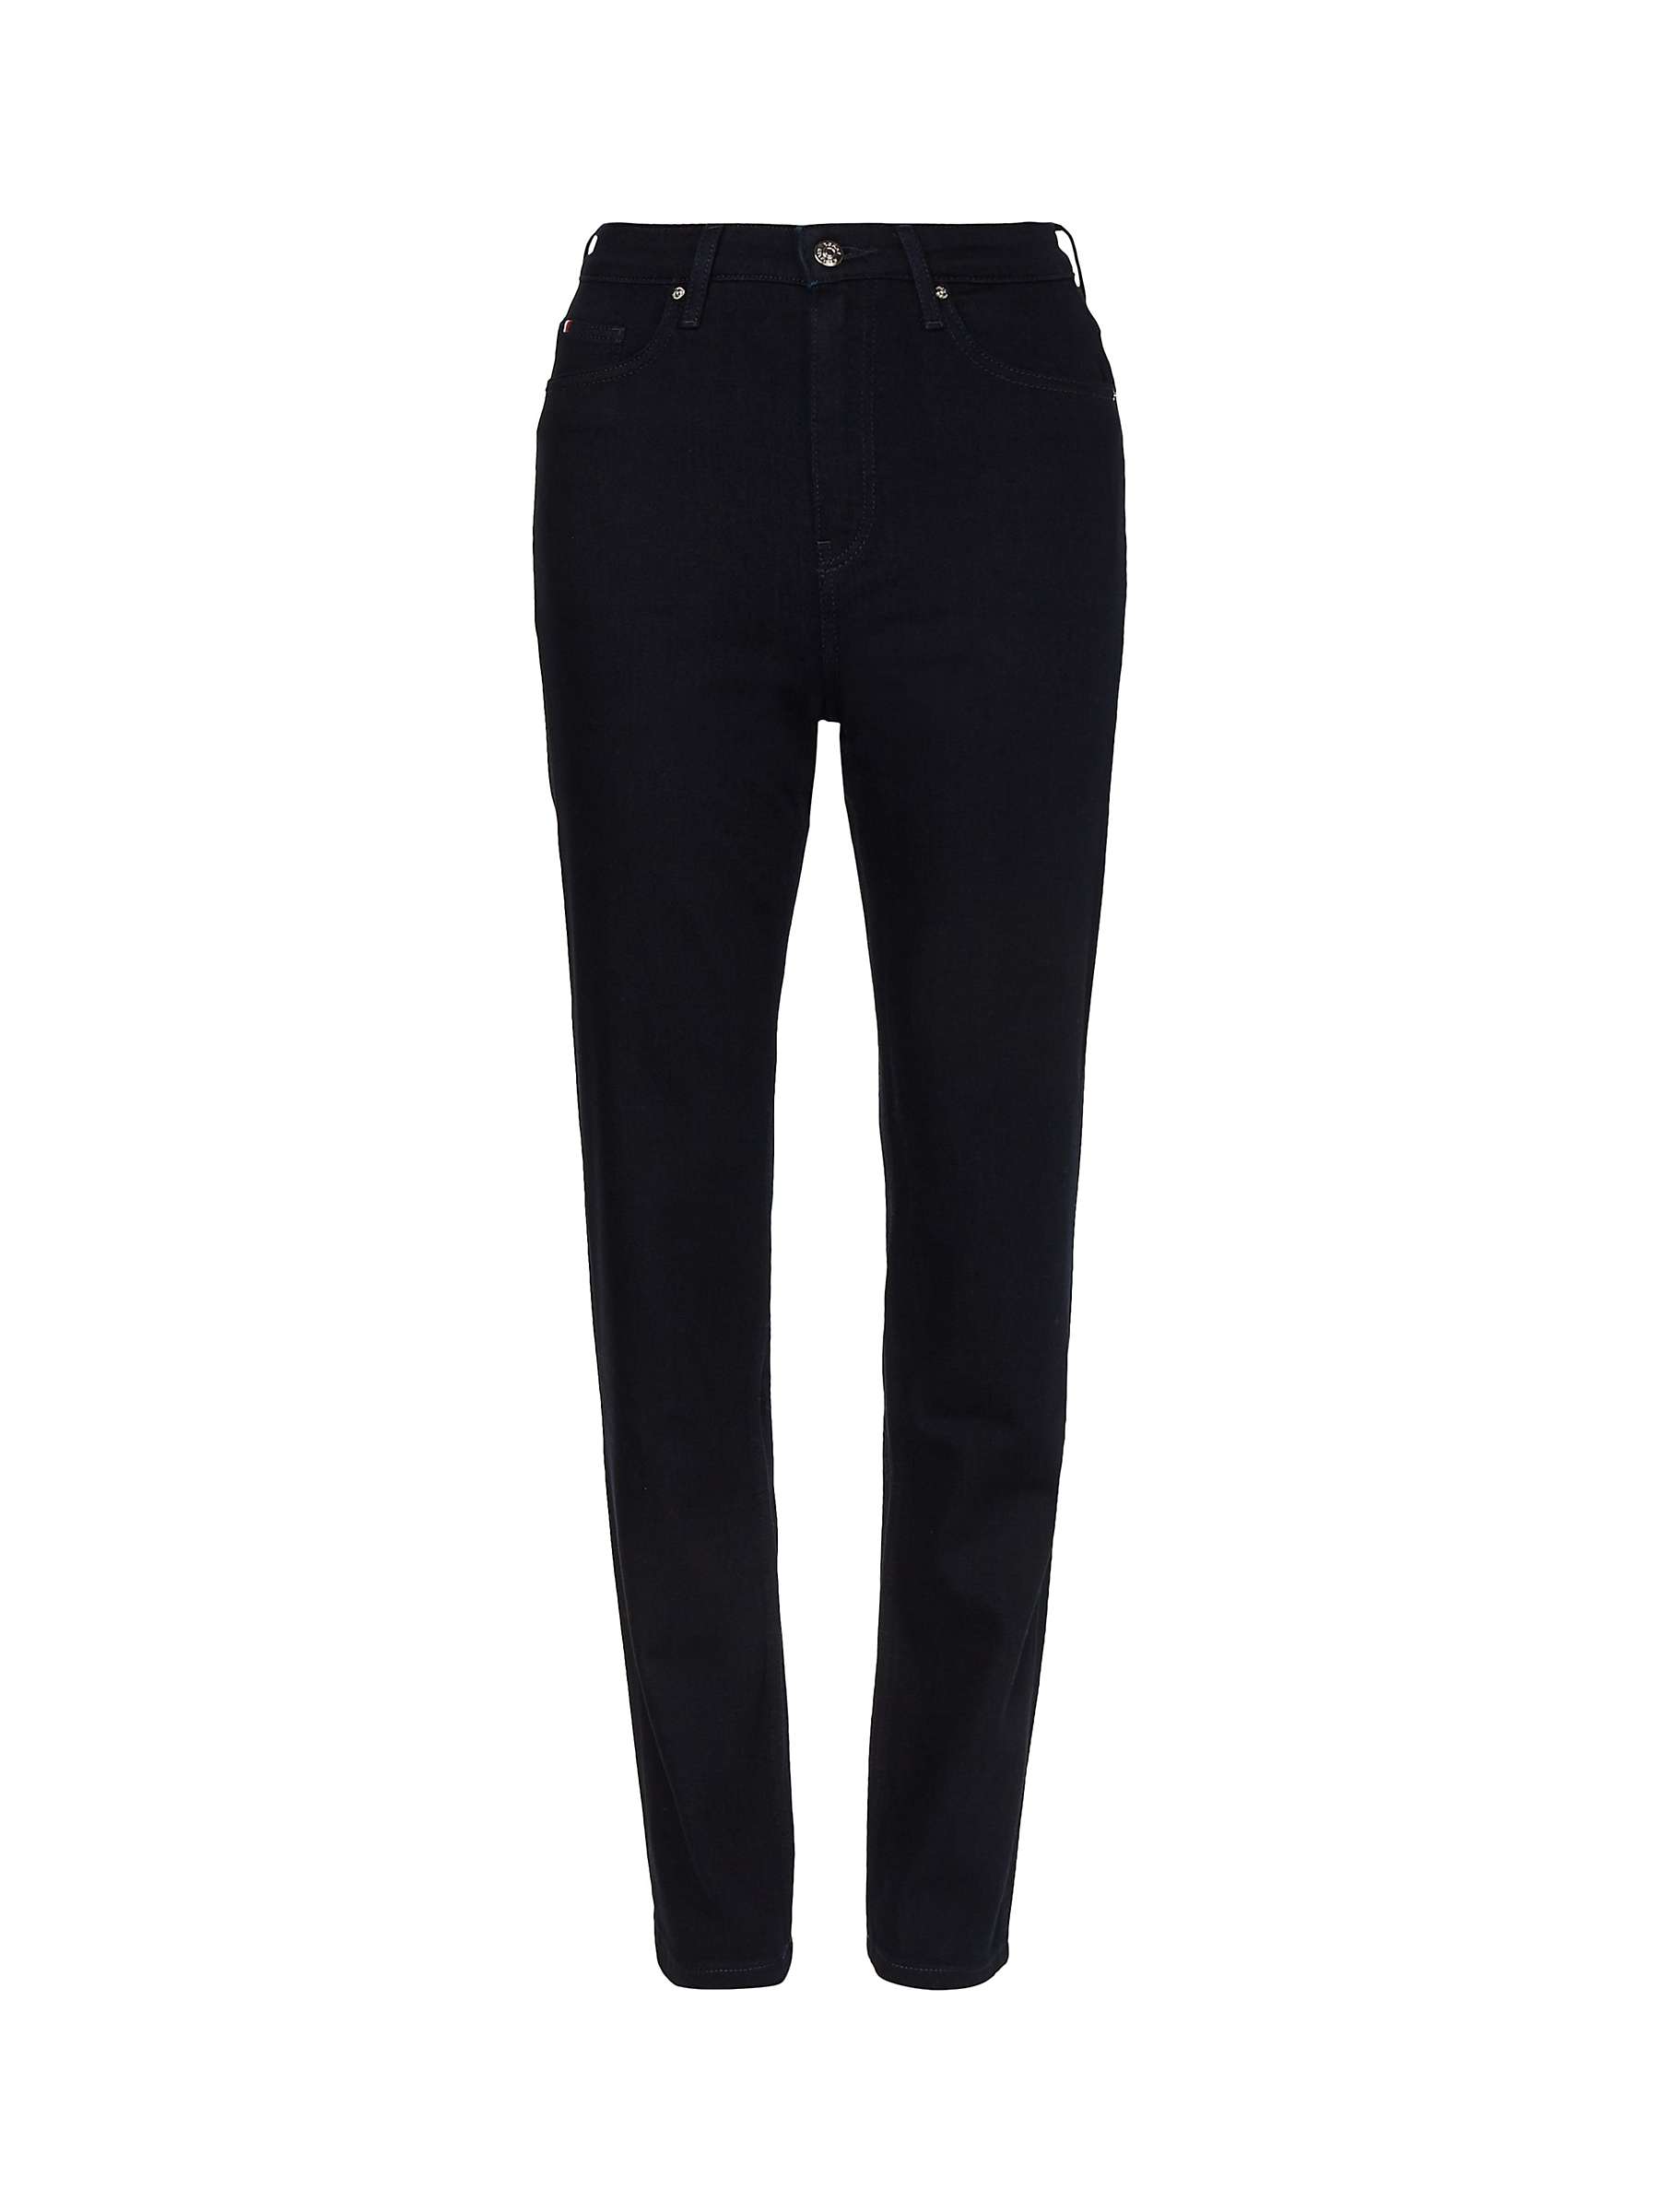 Buy Tommy Hilfiger Classic Straight Leg Jeans, Tao Online at johnlewis.com